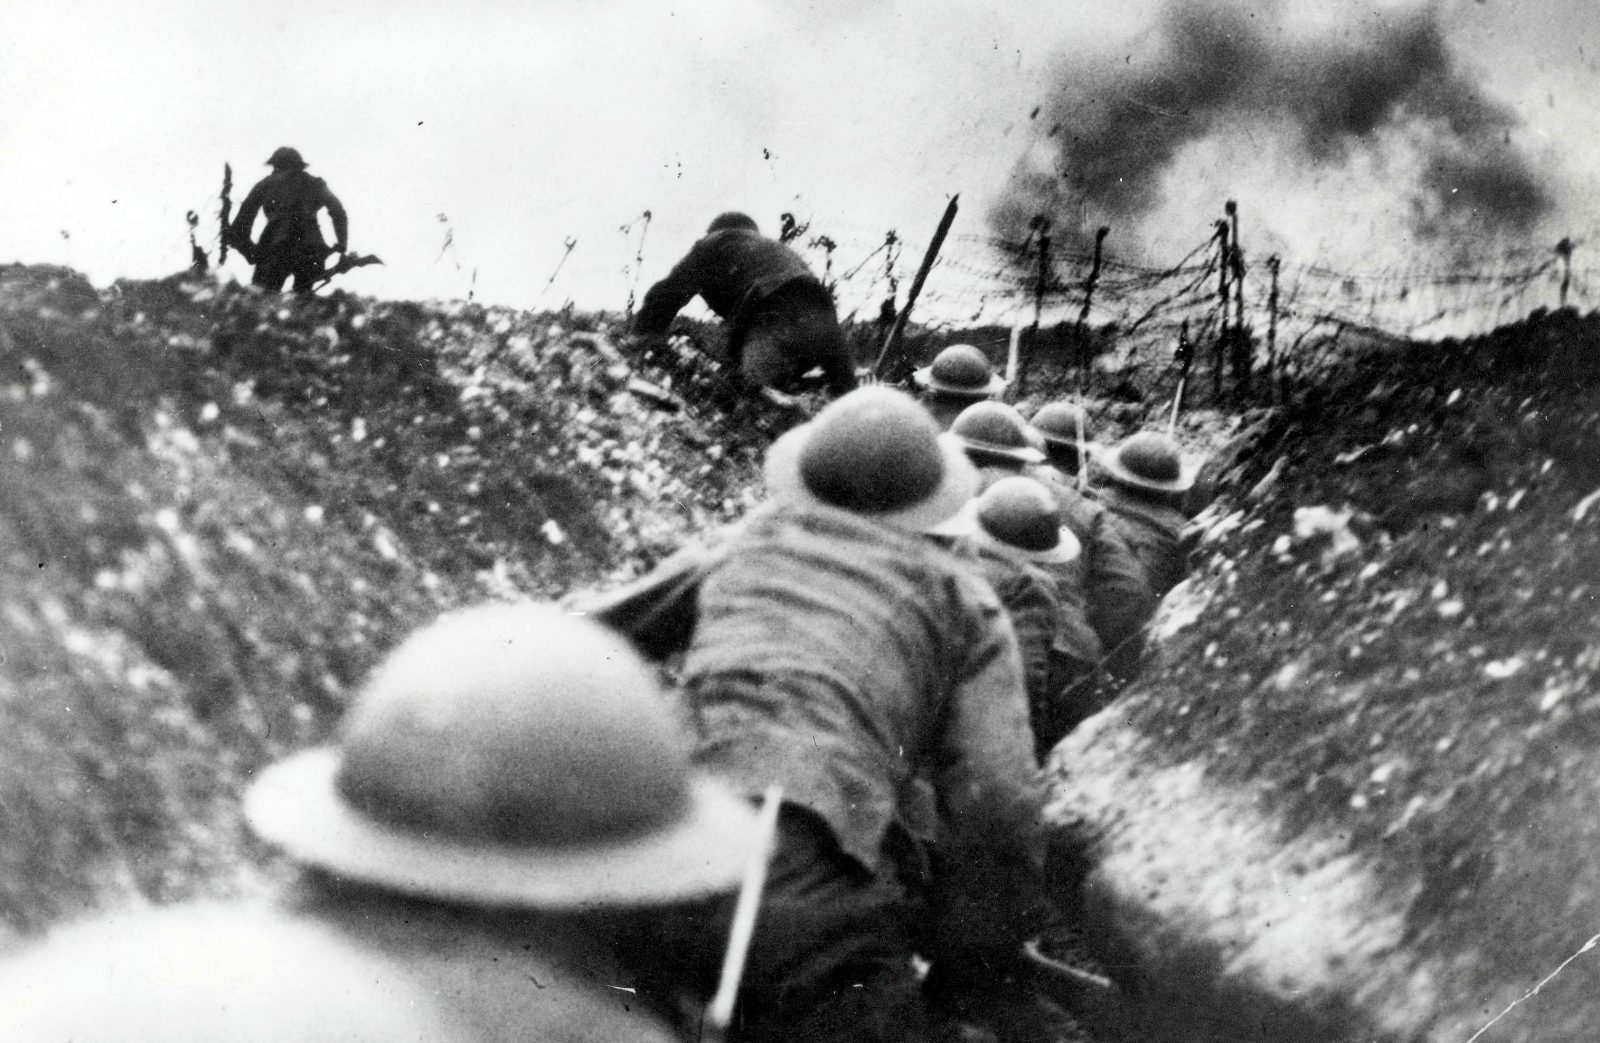 All Answers to This Trivia Quiz Are Numbers – Can You Get at Least 15/20? World War I